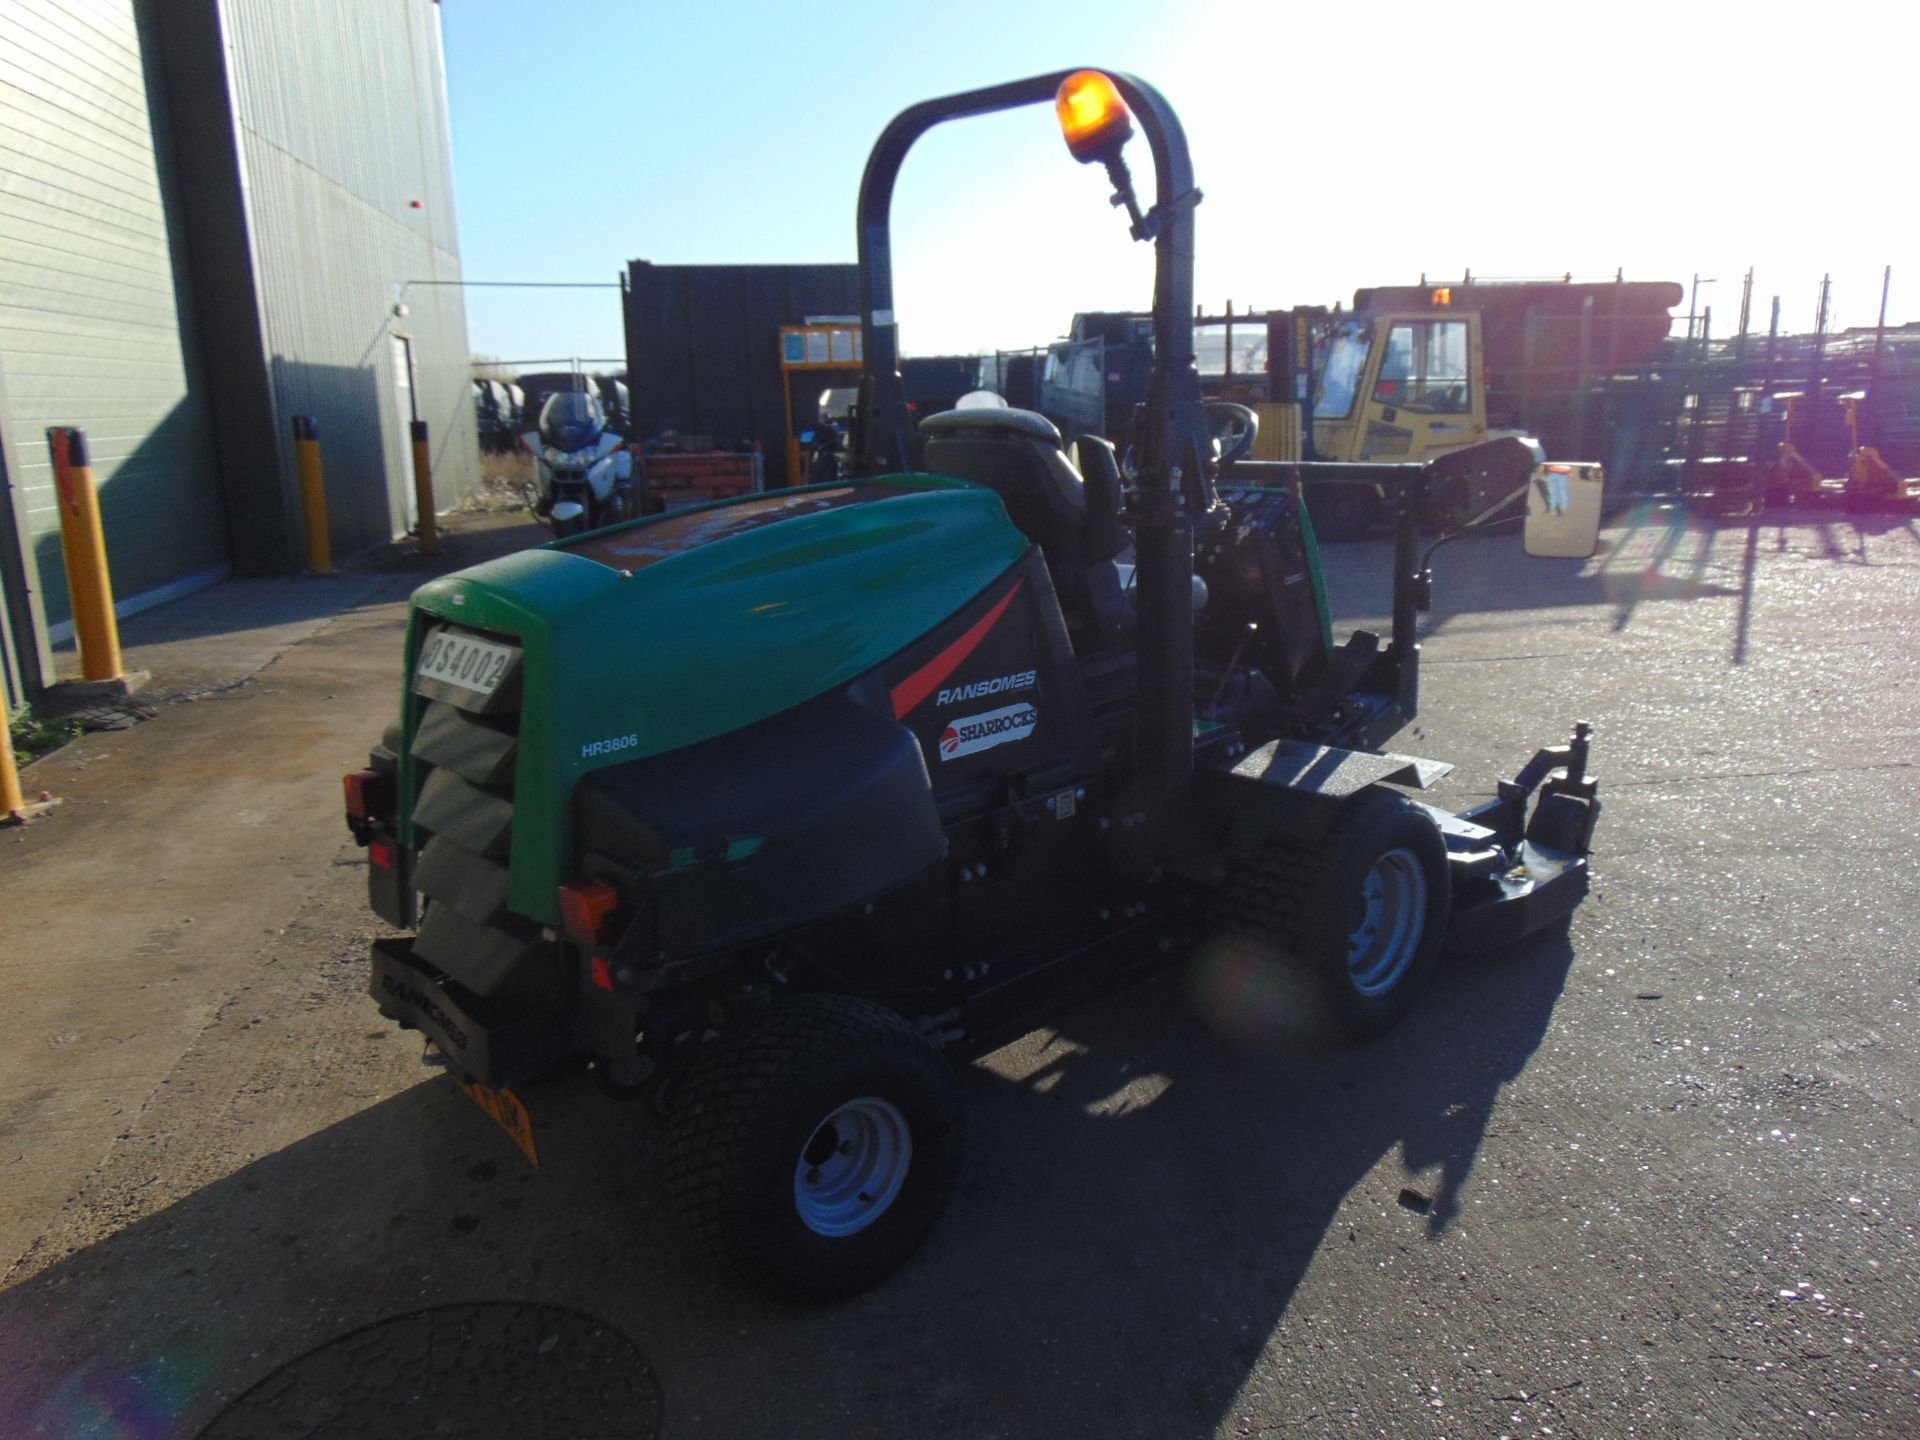 2014 Ransomes 4 x 4 HR3806 Kubota Diesel Upfront Rotary Mower ONLY 3,238 HOURS! - Image 7 of 20